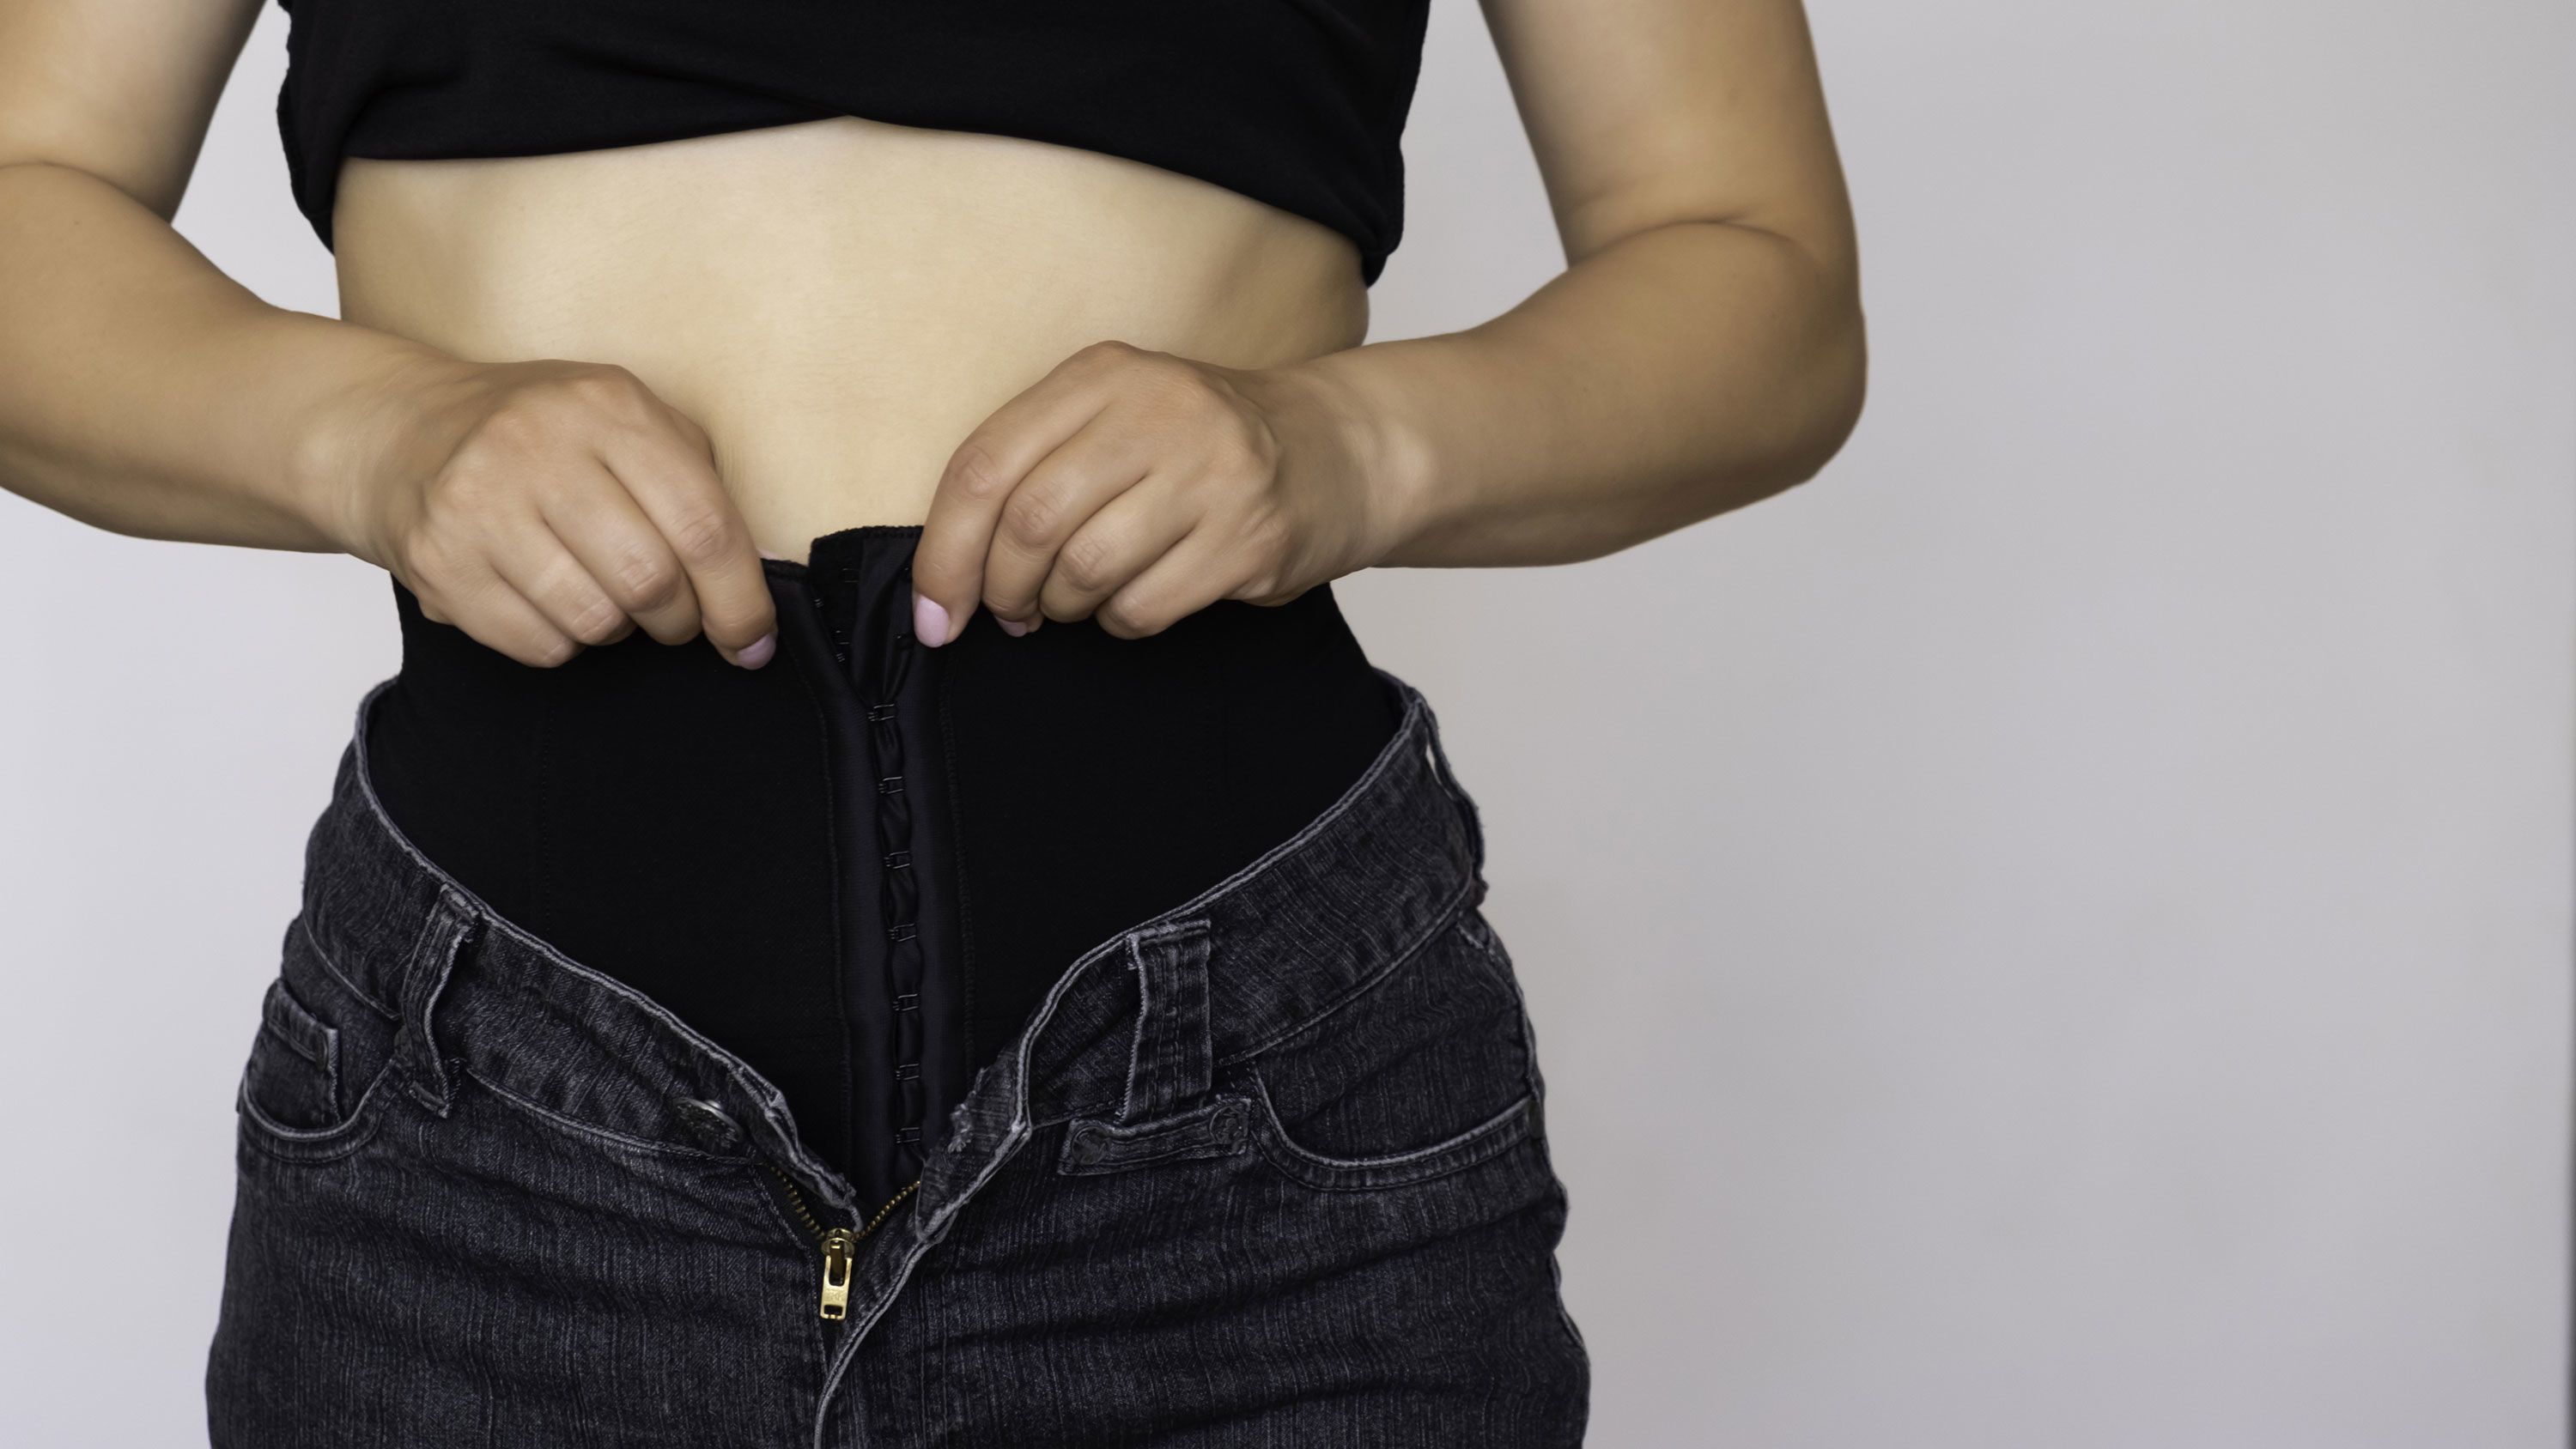 Sante-Education - Article - Slimming girdle : beware of the risks